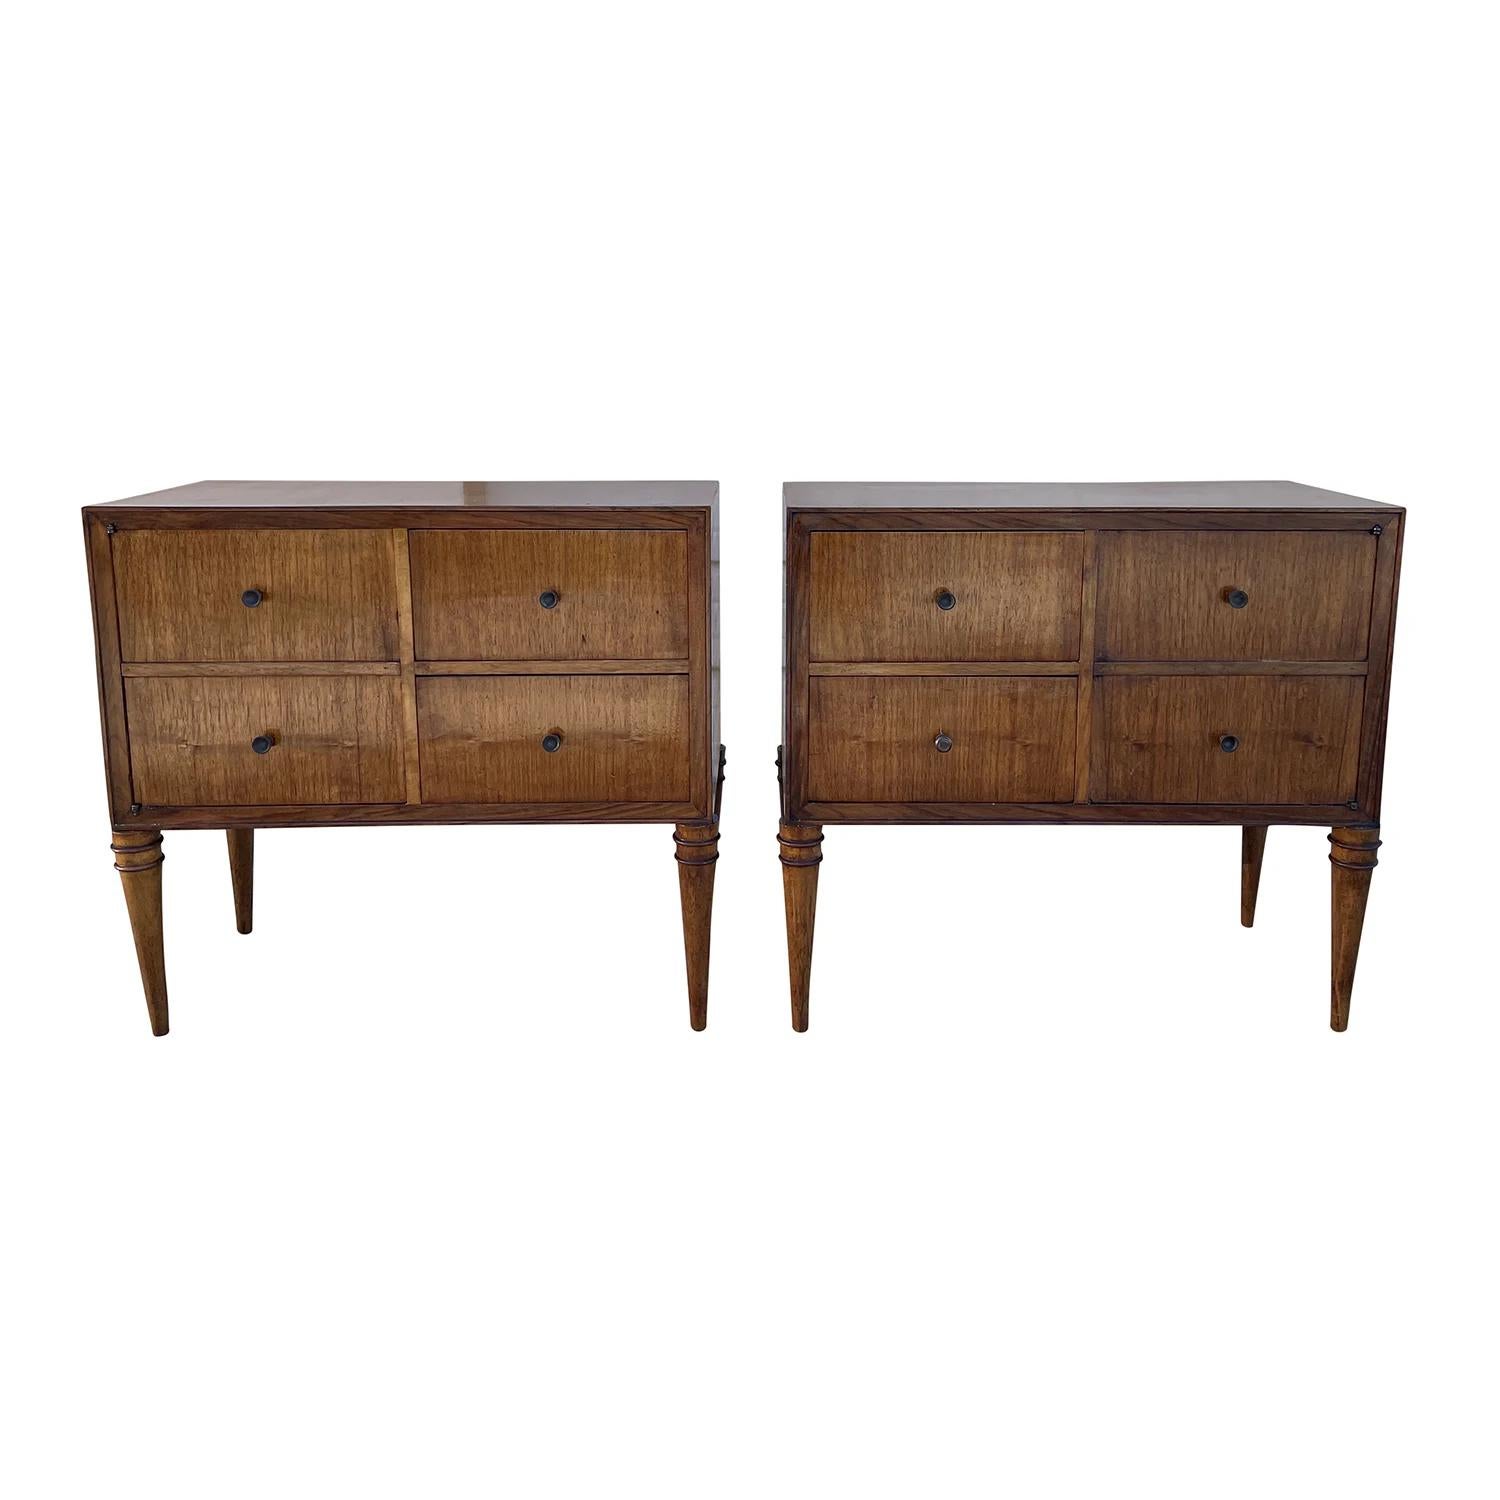 A light-brown, vintage Mid-Century Modern Italian pair of tall nightstands, bedside tables made of hand carved polished walnut, each of them is composed with four drawers and metal handles, pulls. Designed by Tomaso Buzzi in good condition. The